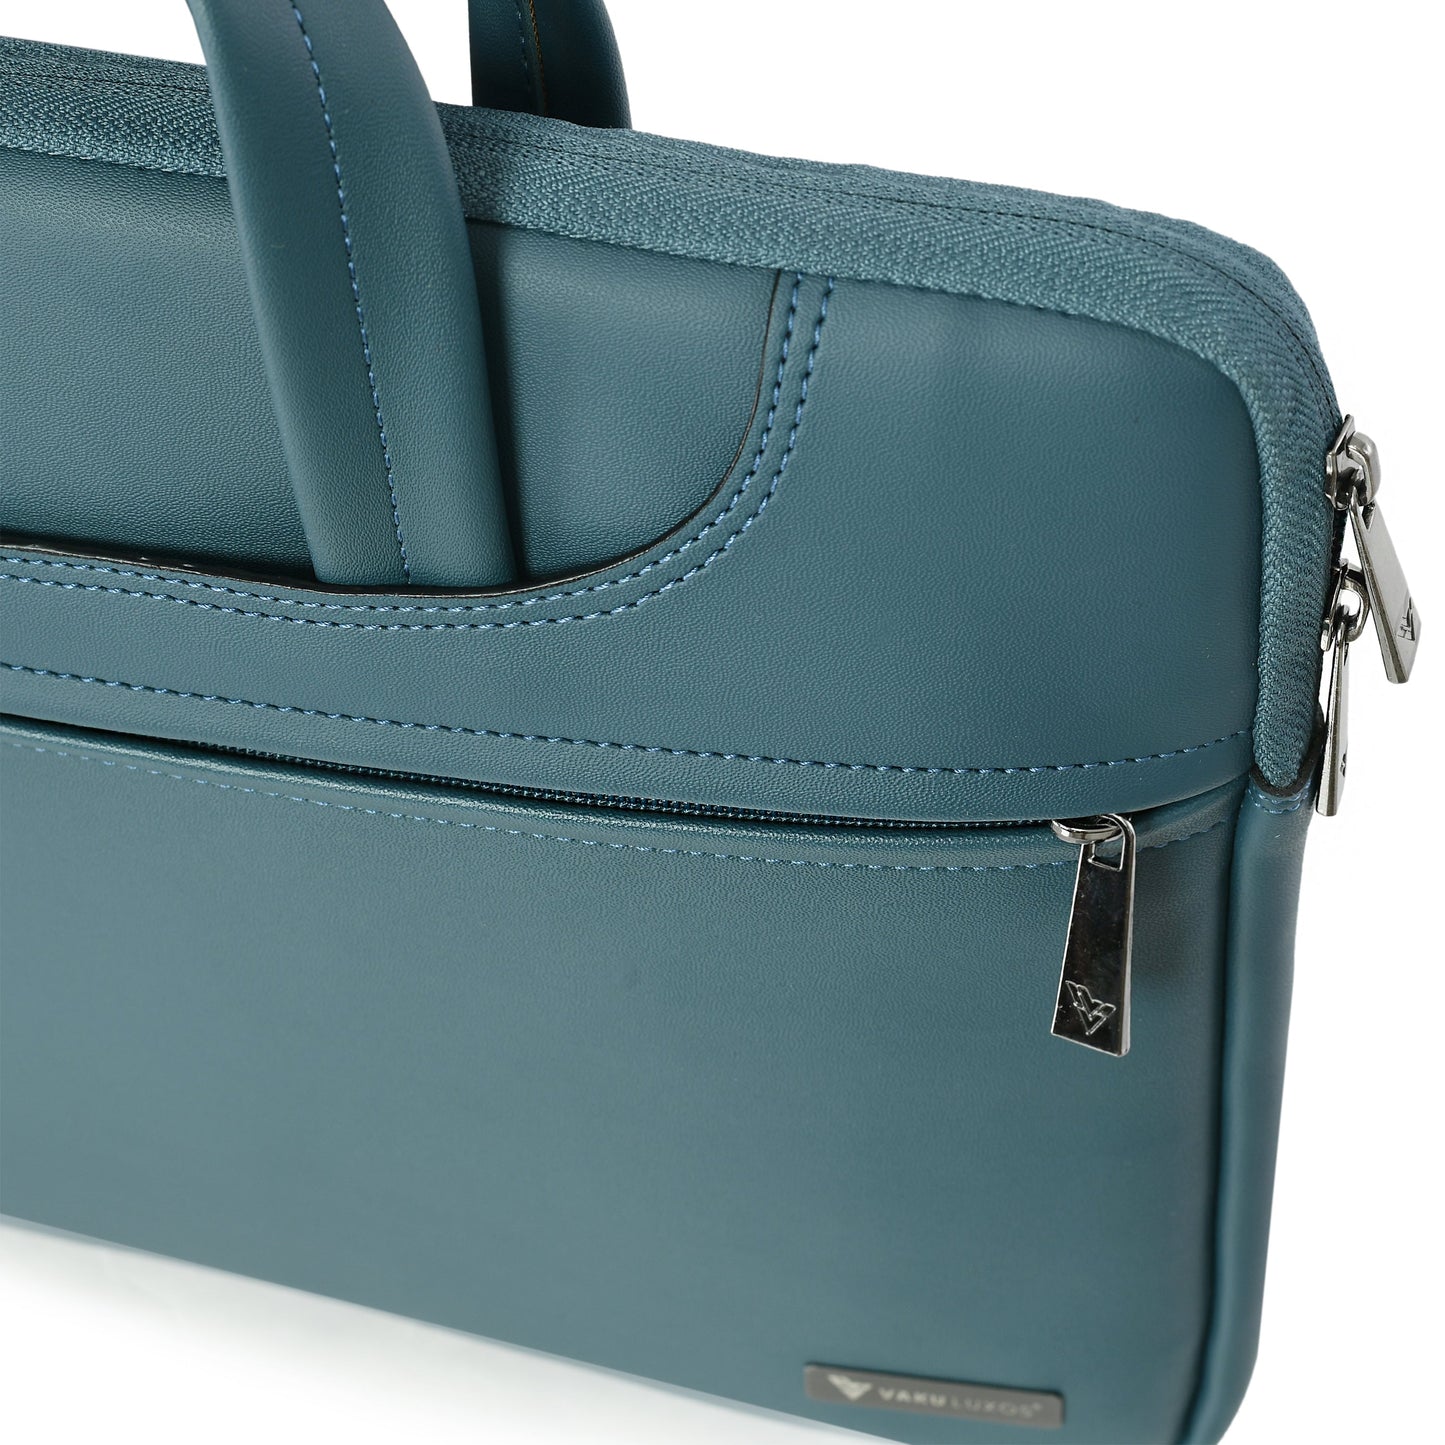 vaku-luxos®-da-italiano-refined-leather-sleeve-with-free-pouch-strap-highly-durable-compatilbe-for-macbook-14-peacock-blue8905129015190